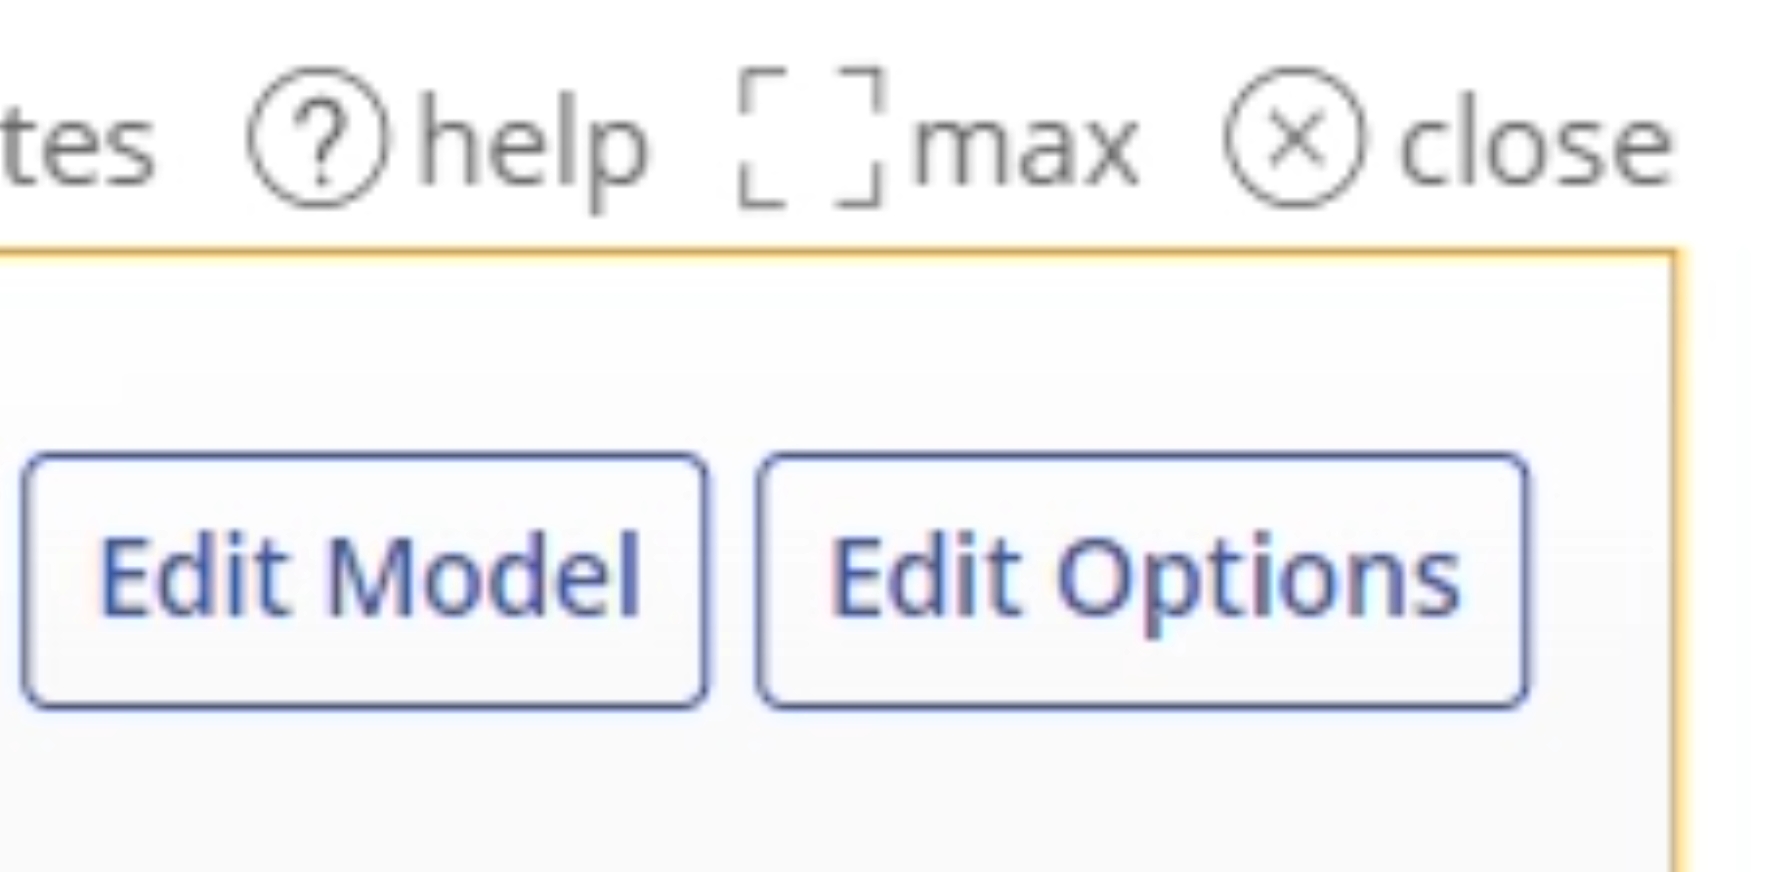 Two buttons showing options to edit the output